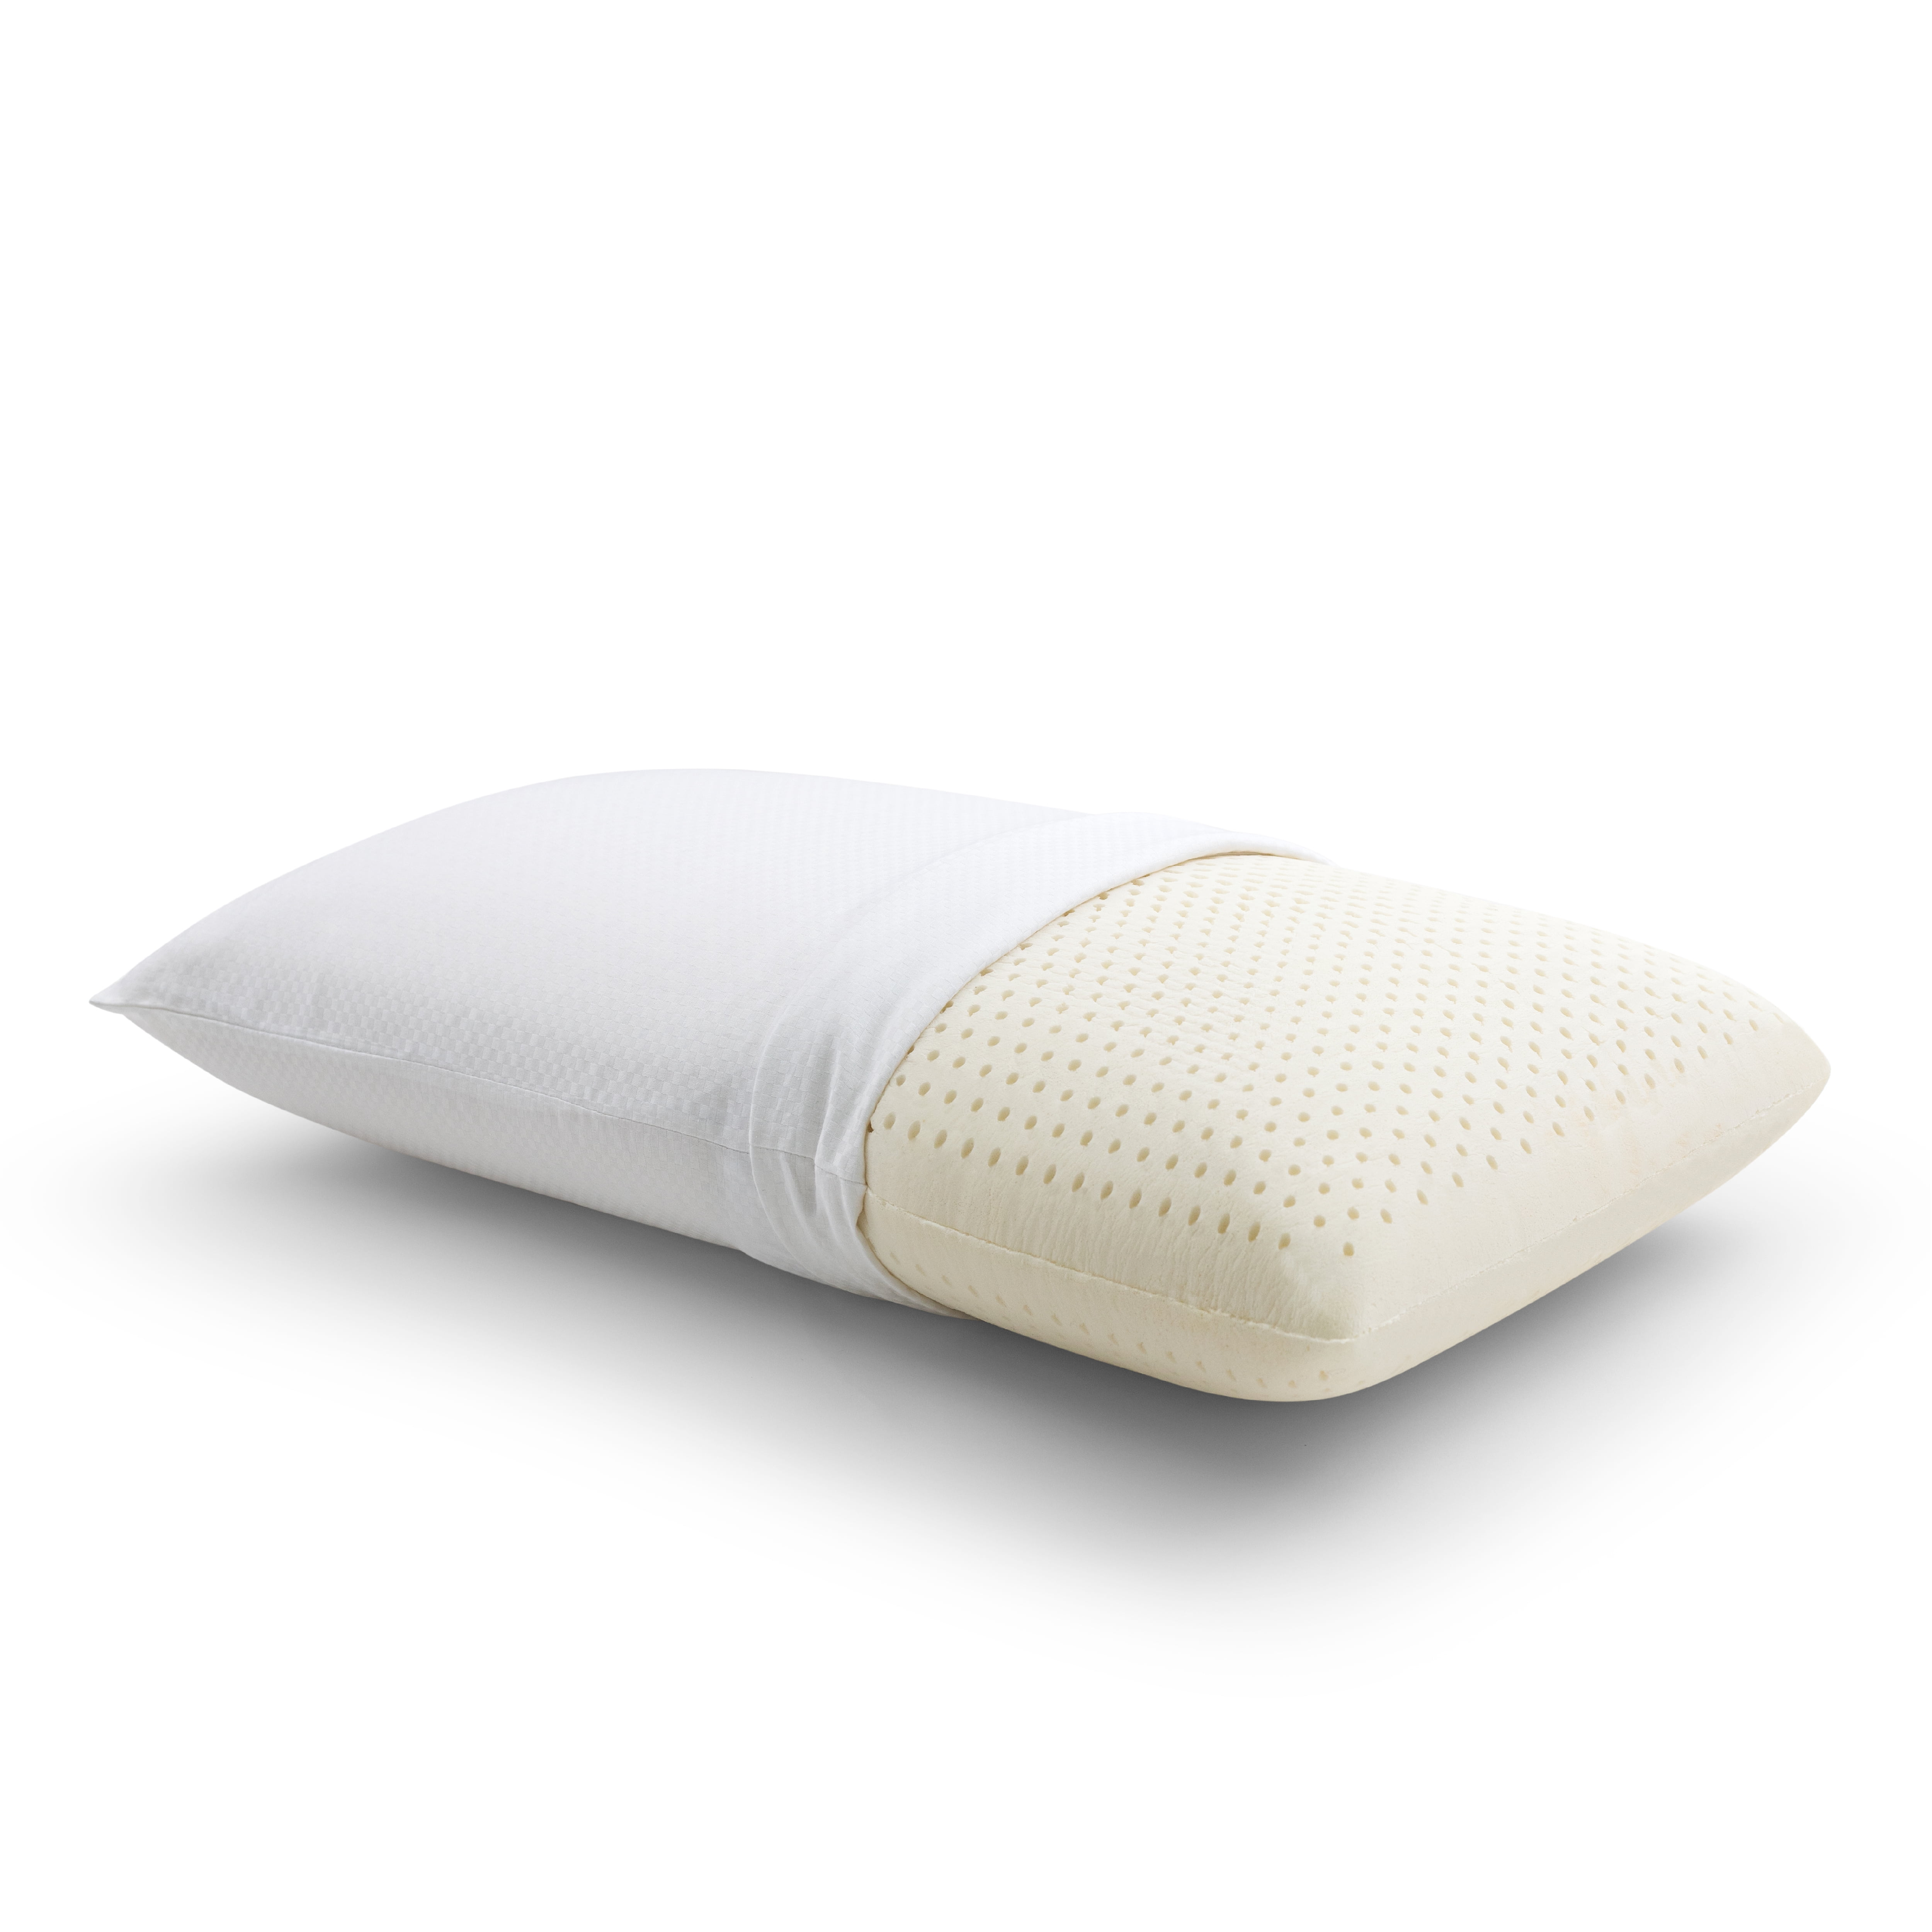 Beautyrest® Latex Foam Bed Pillow with Cover, Standard, Cotton